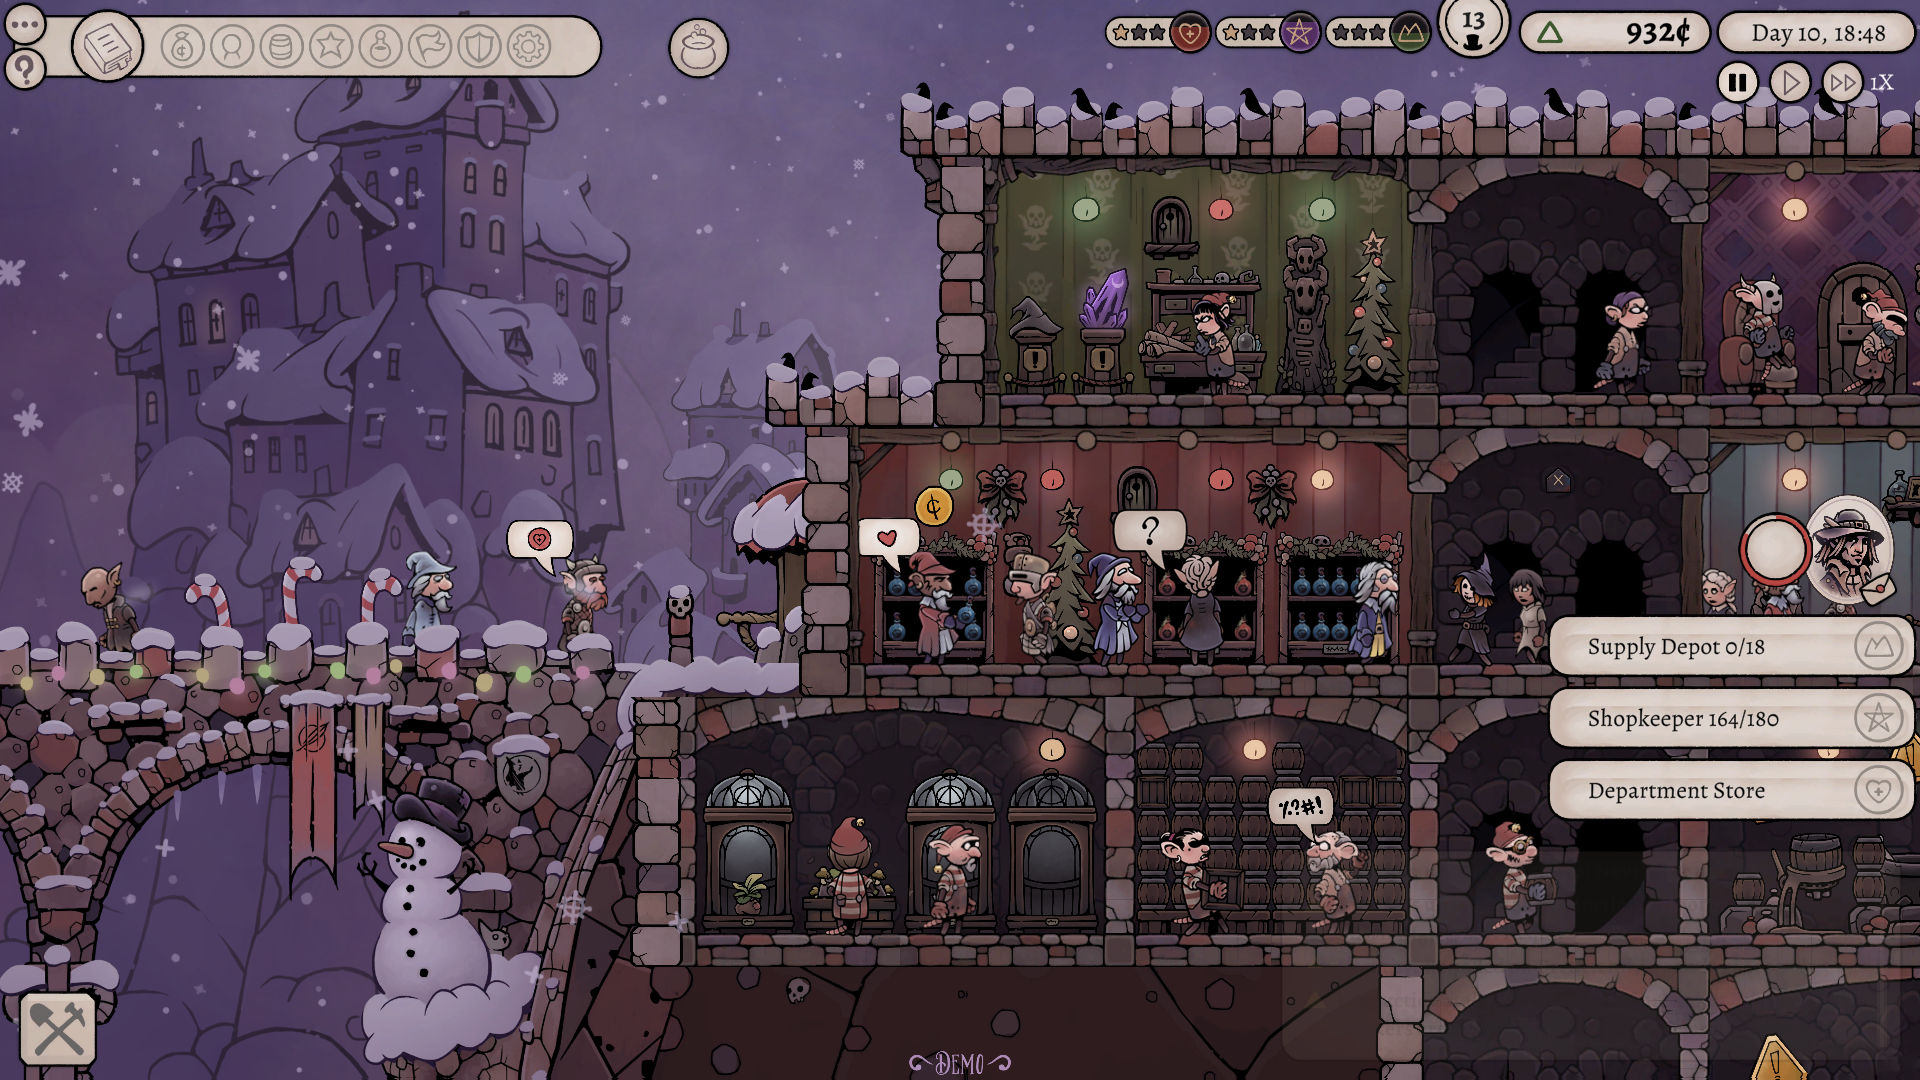 Workers and customers alike still arrive at the shop, despite the snowy weather via Potion Tycoon (2023), Daedalic Entertainment